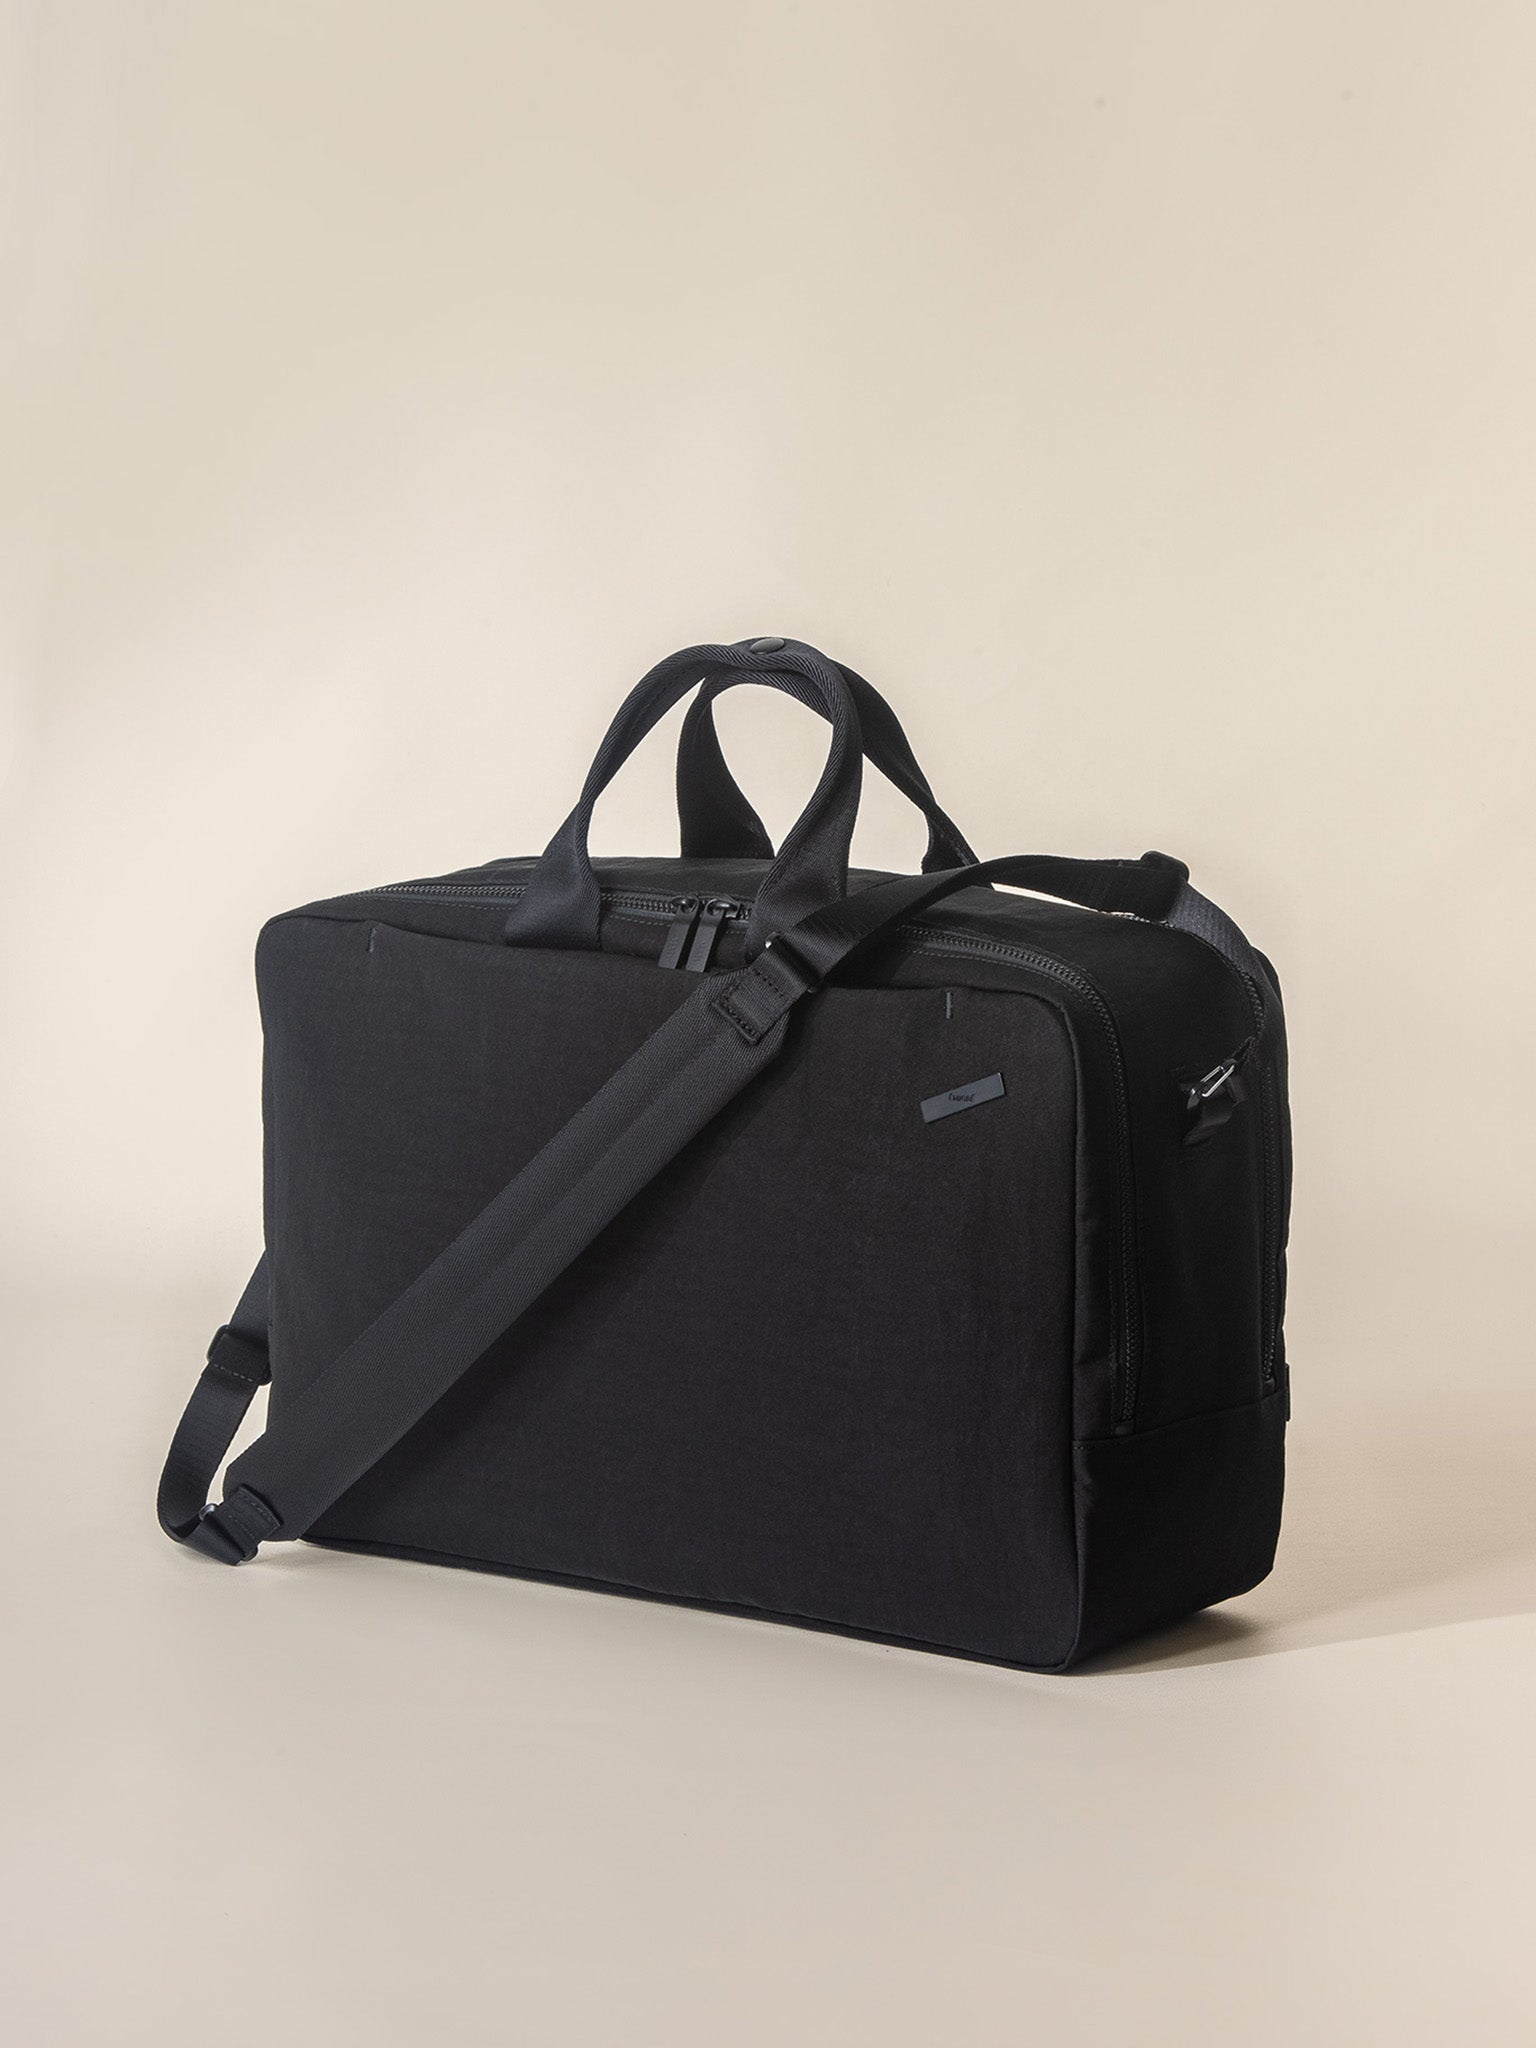 A luxury Boston bag crafted from high-quality materials